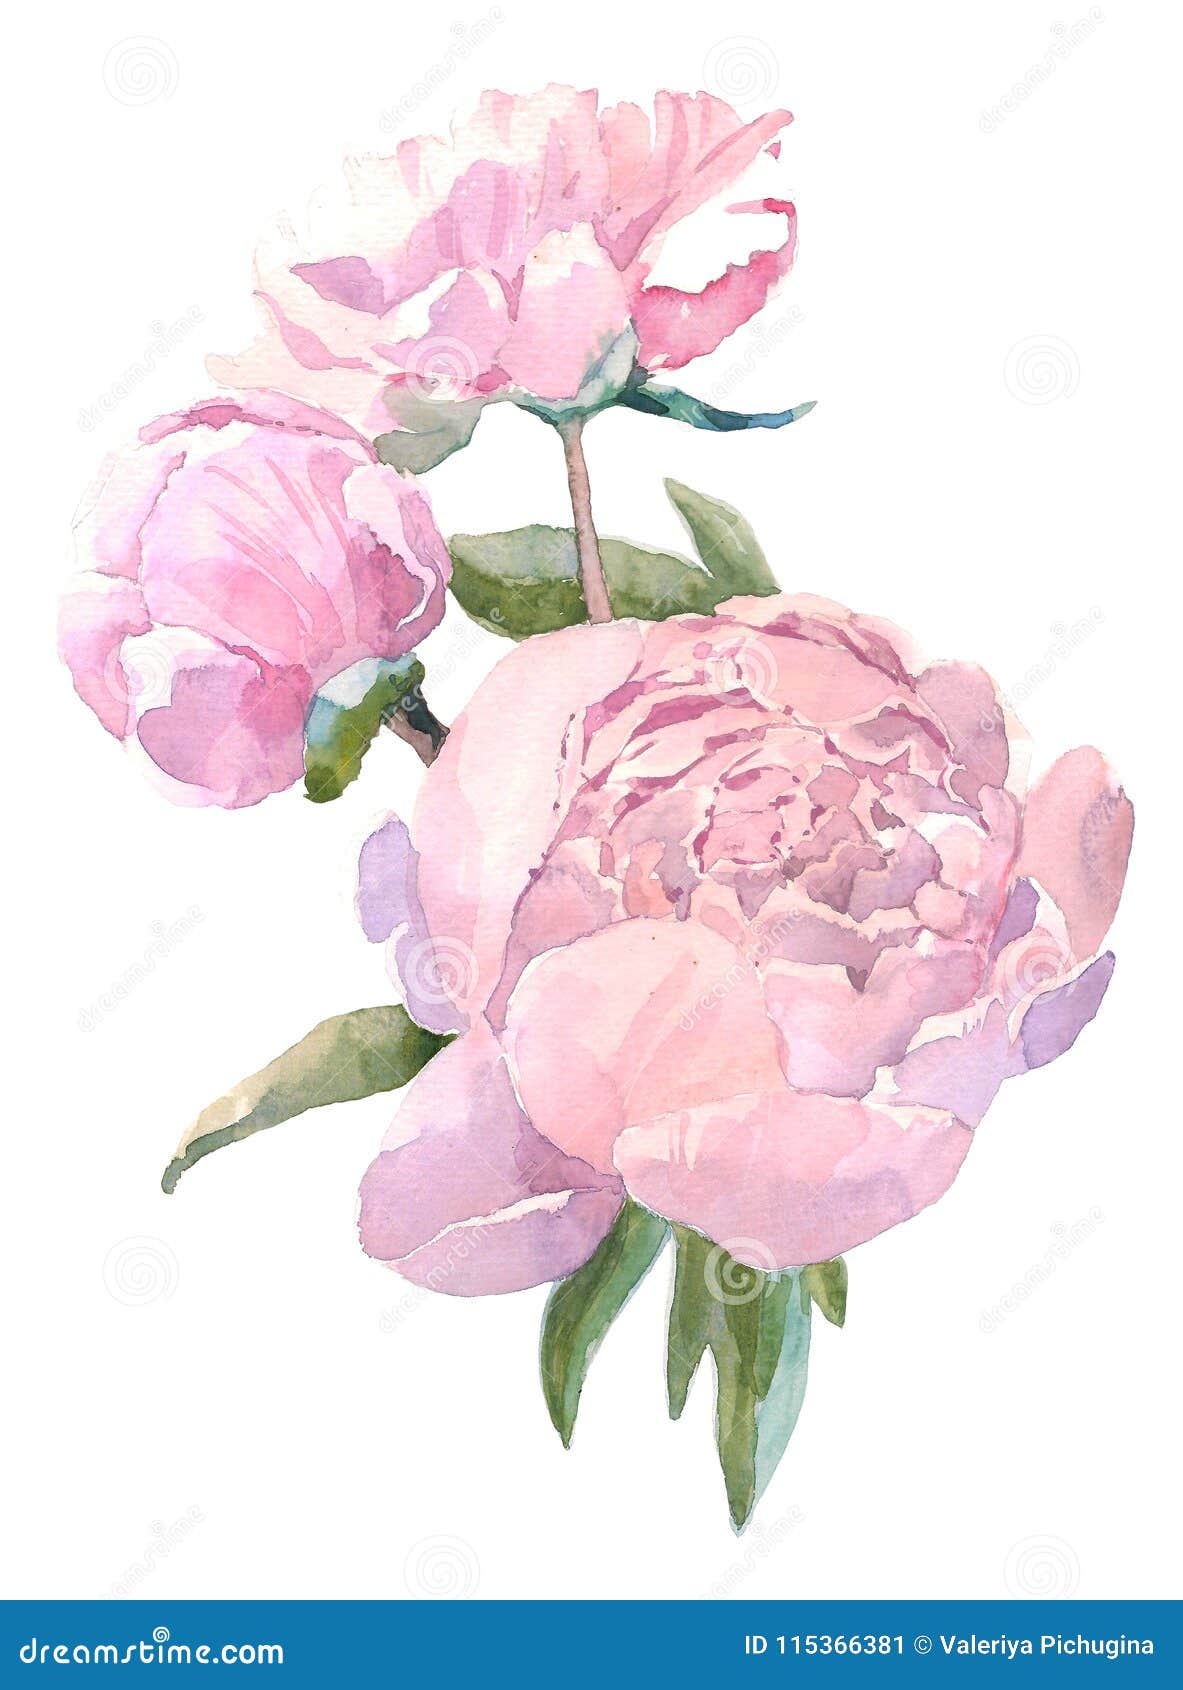 Watercolor Illustration Vintage Bouquet of Flowers, Peonies. Hand Drawn  Illustration Isolated on White Background Stock Illustration - Illustration  of isolated, beautiful: 115366381